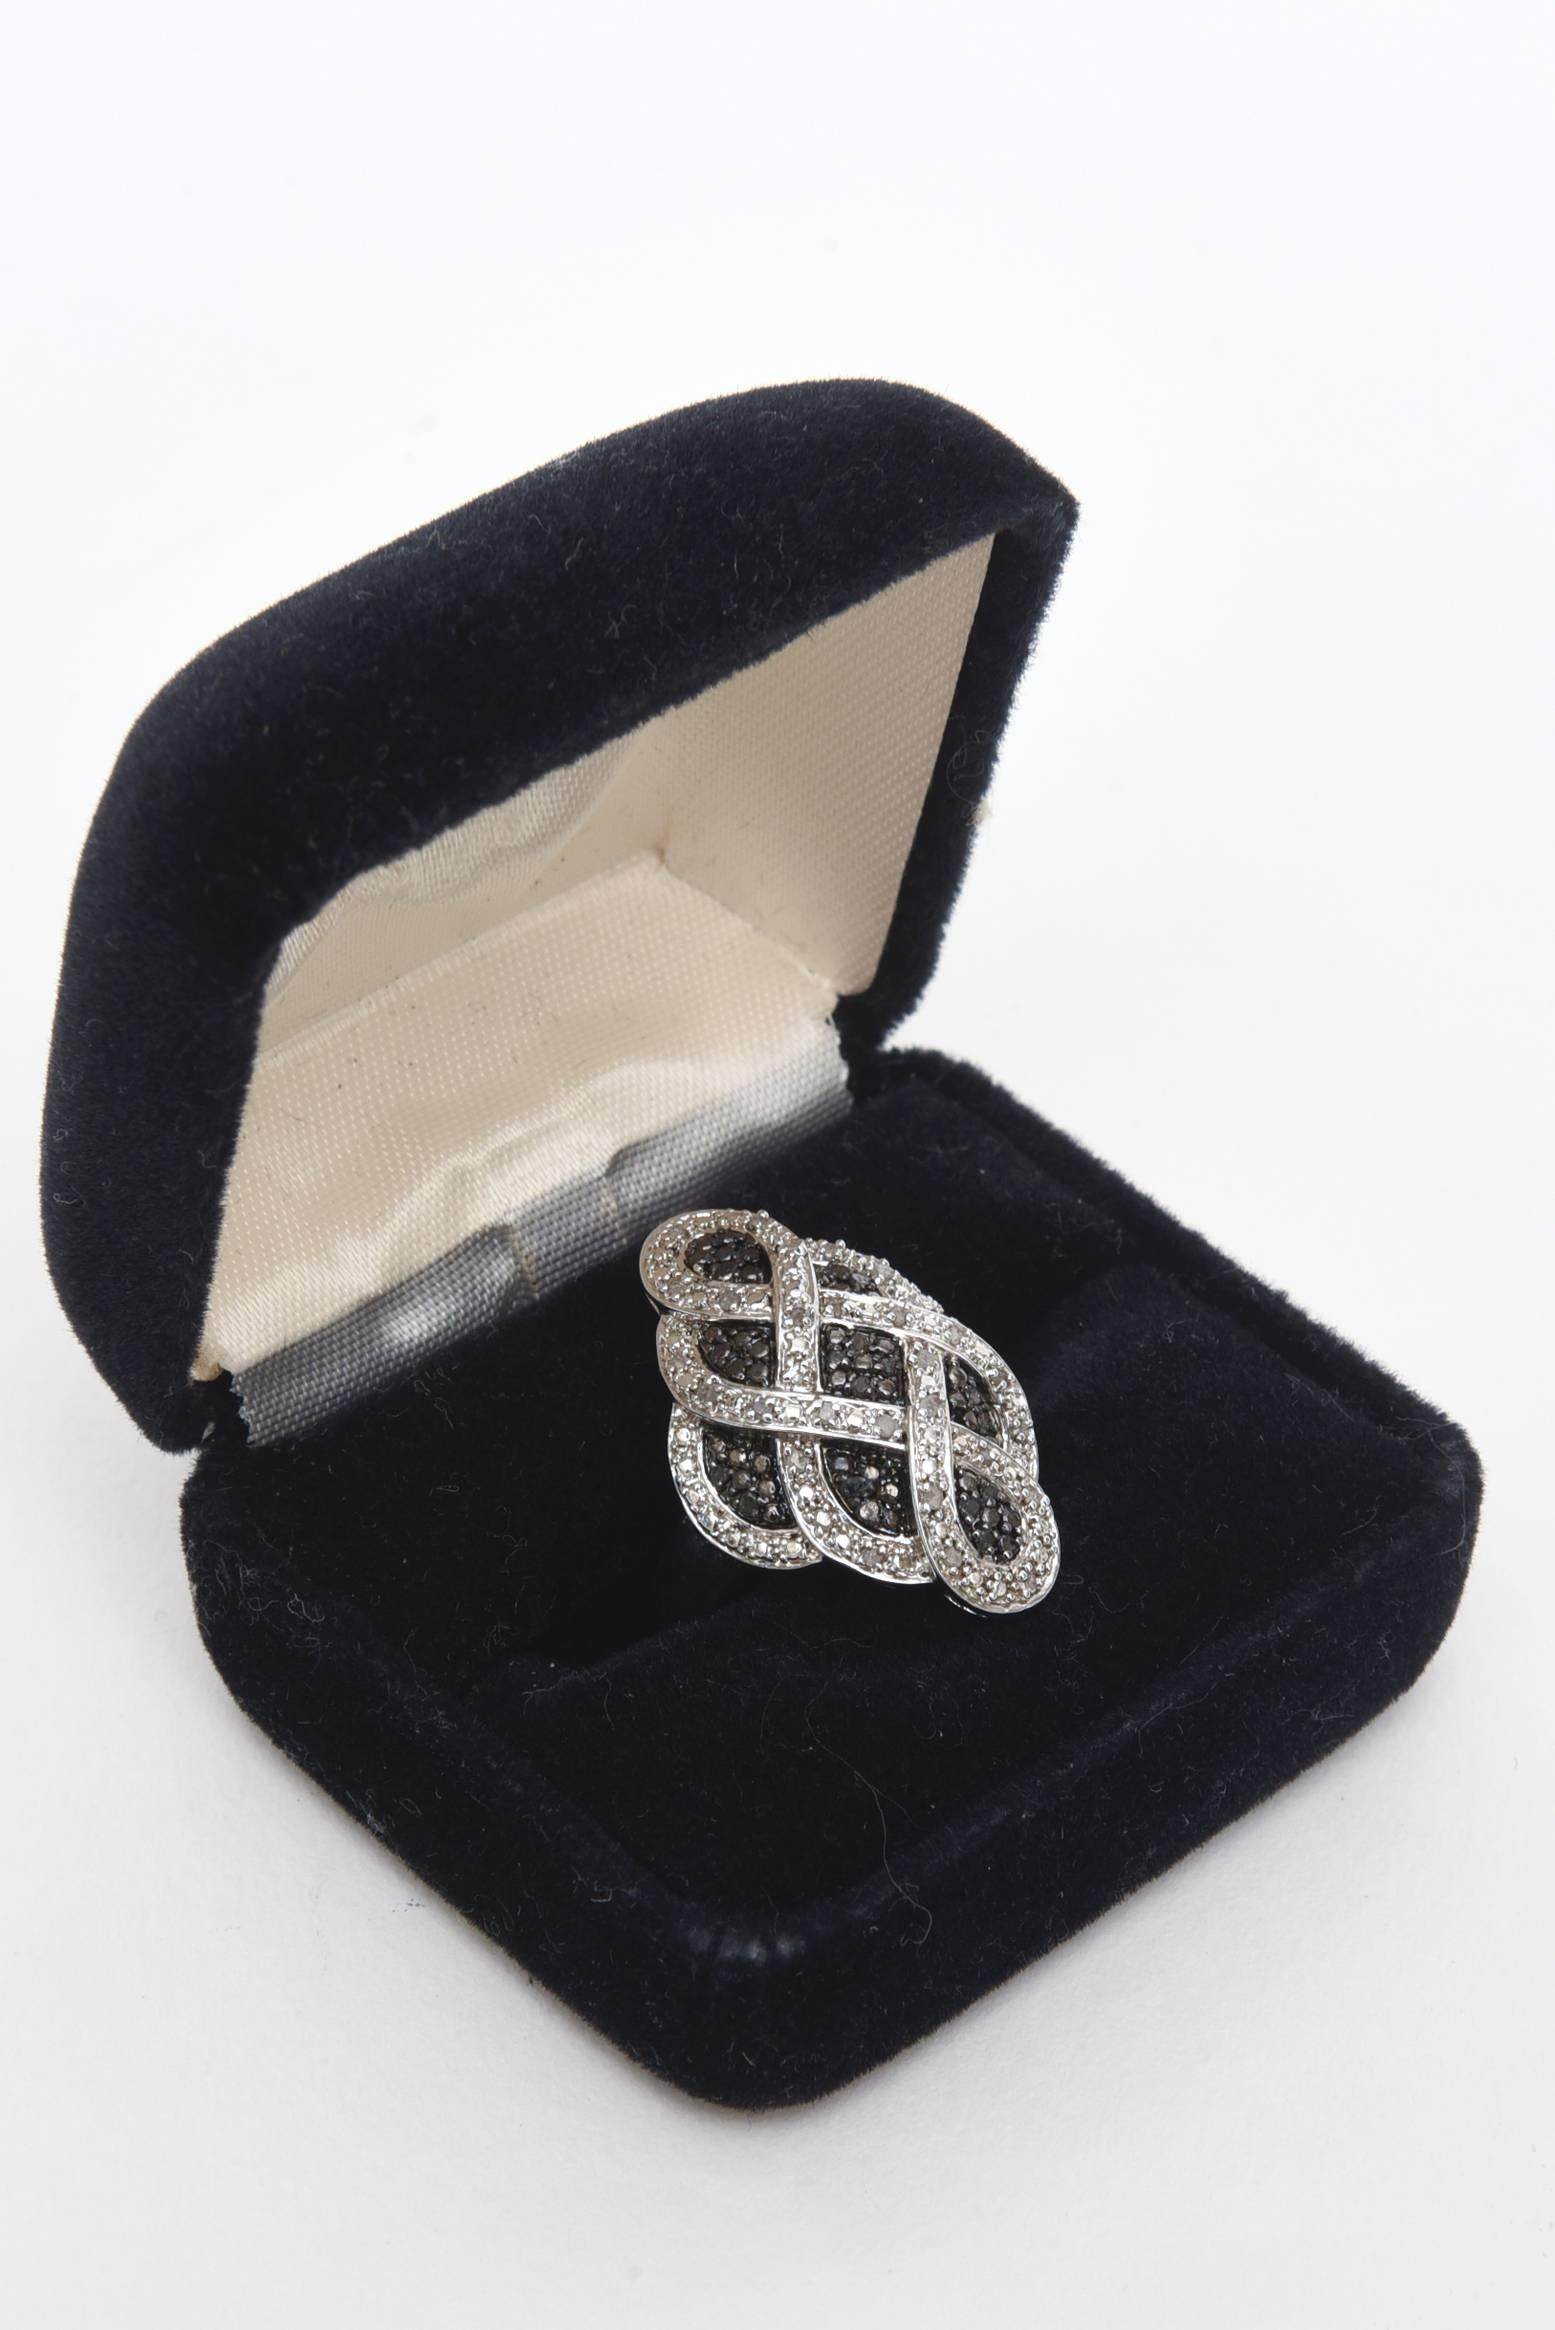  Criss Cross Combination of White and Black Diamonds & Sterling Silver Ring 2